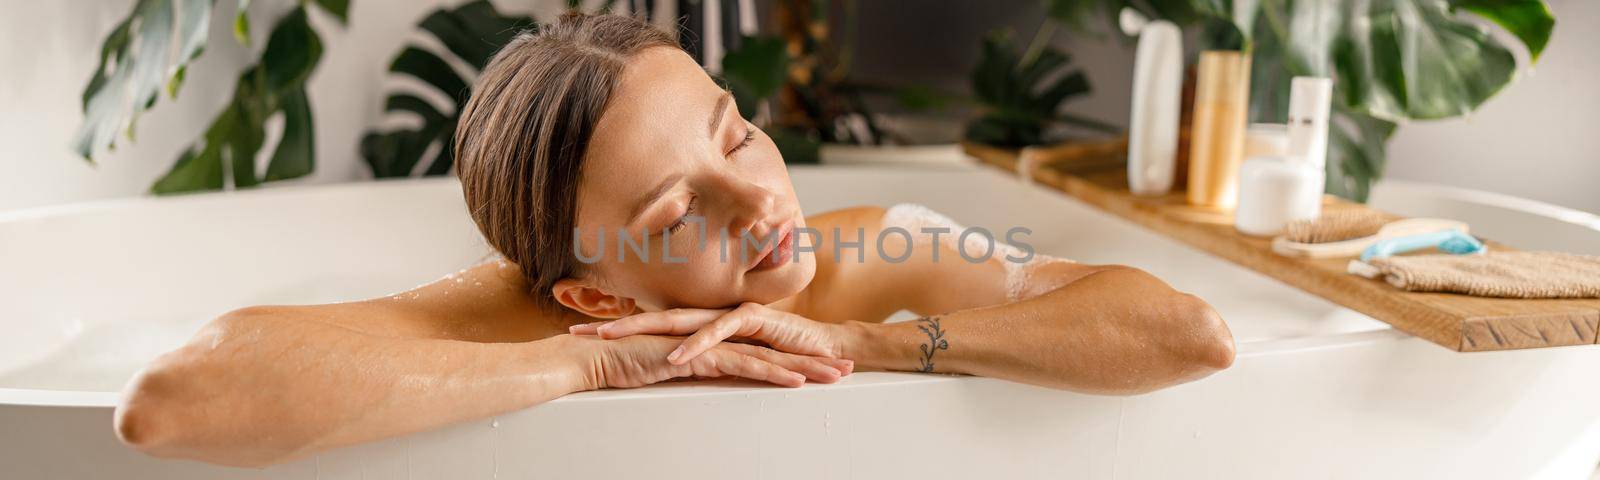 Dreamy young woman leaning on a bathtub side, relaxing with eyes closed at home. Wellness, beauty and care concept